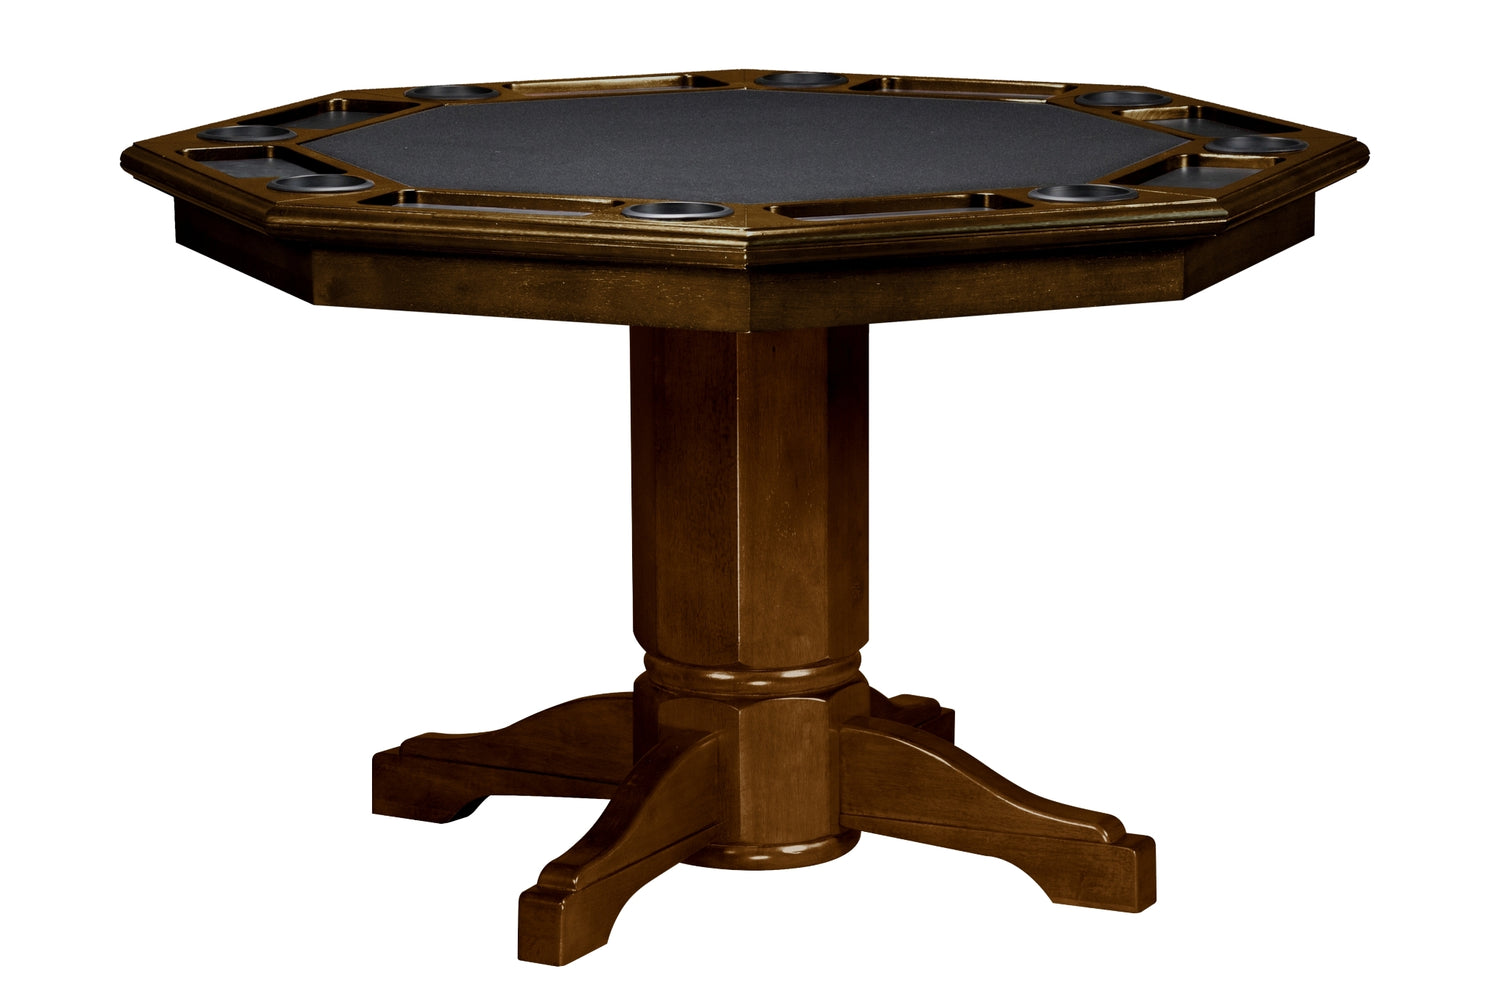 Legacy Billiards Classic 2 in 1 Game Table in Nutmeg Finish